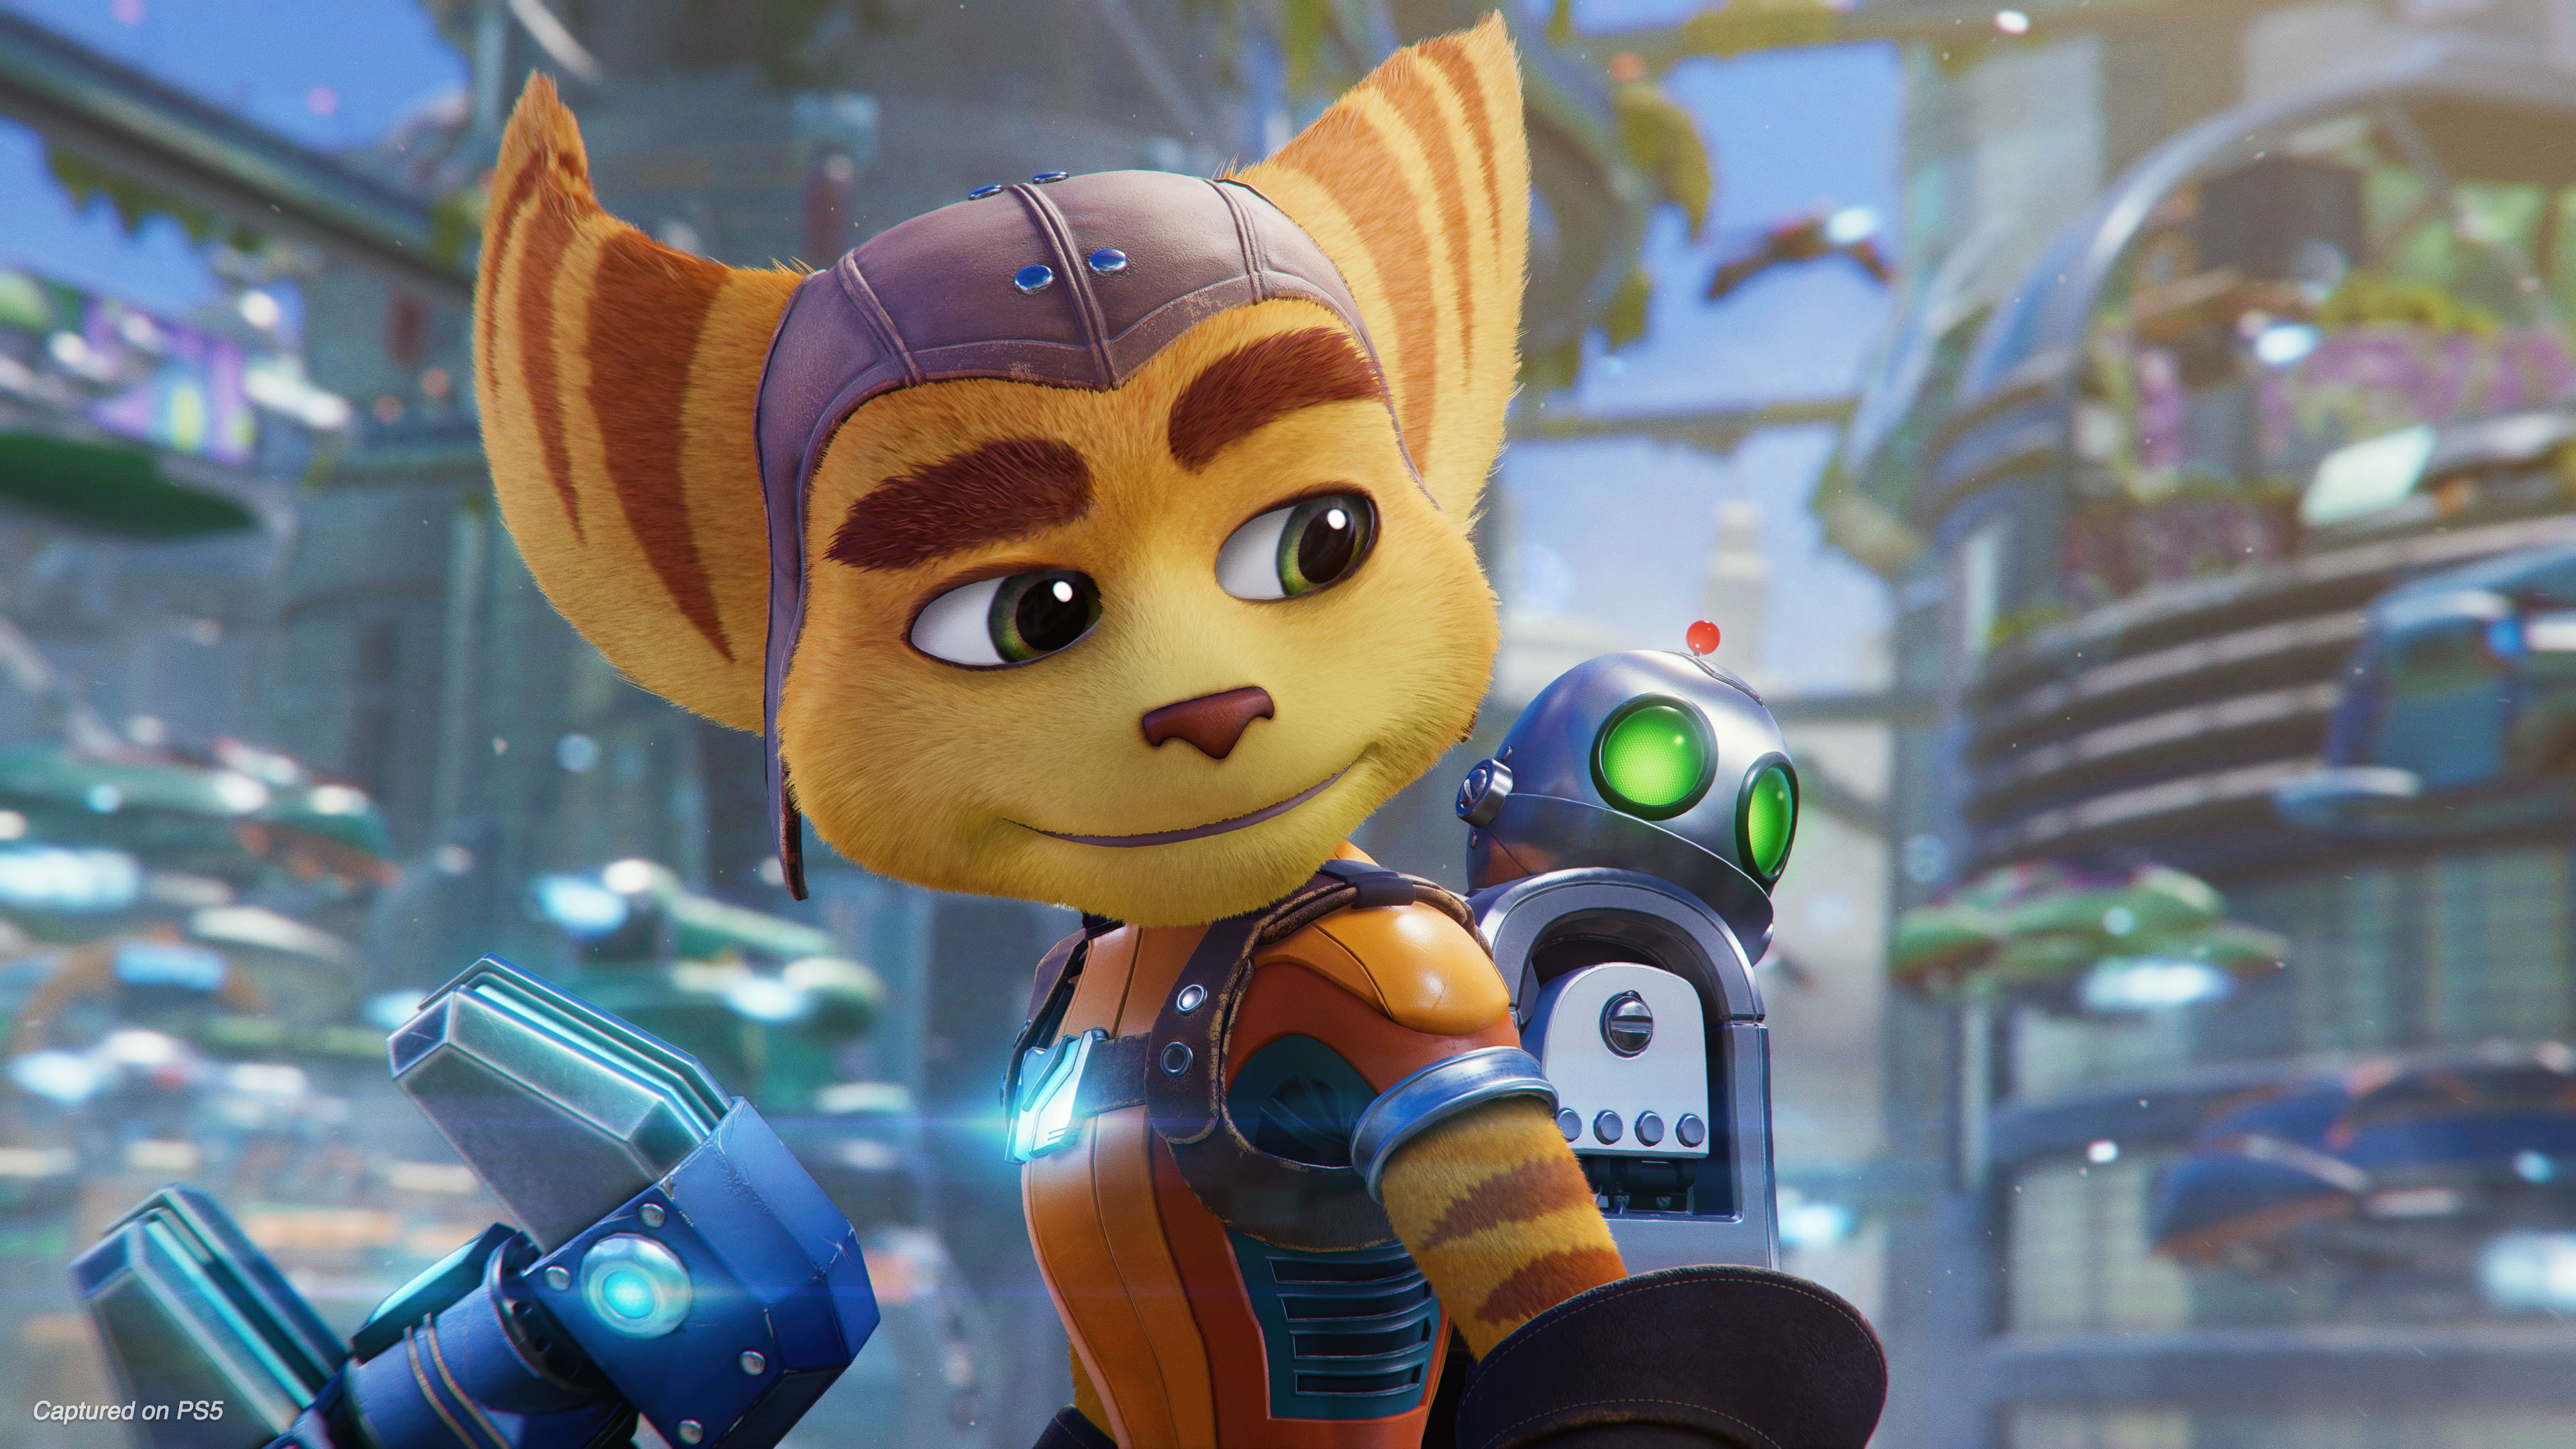 ratchet and clank playstation store